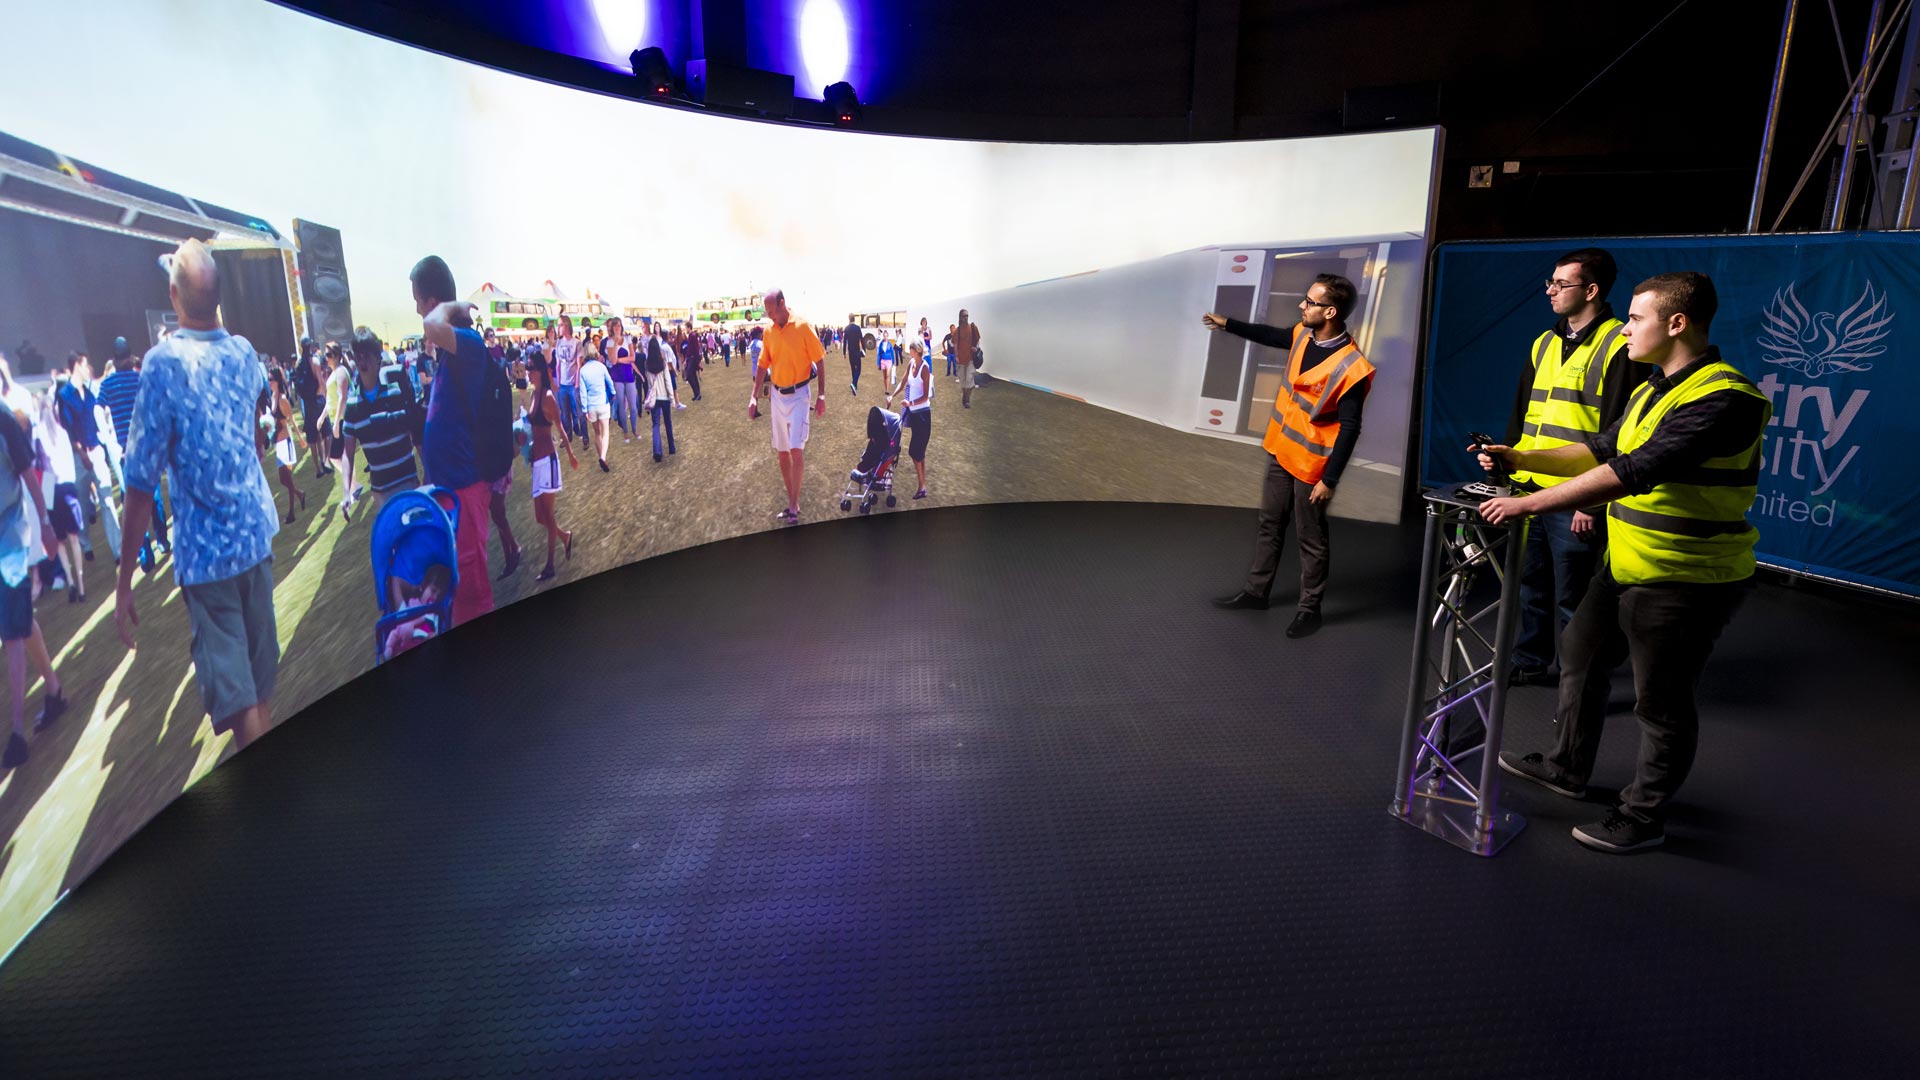 Students using the interactive screen in the simulation centre